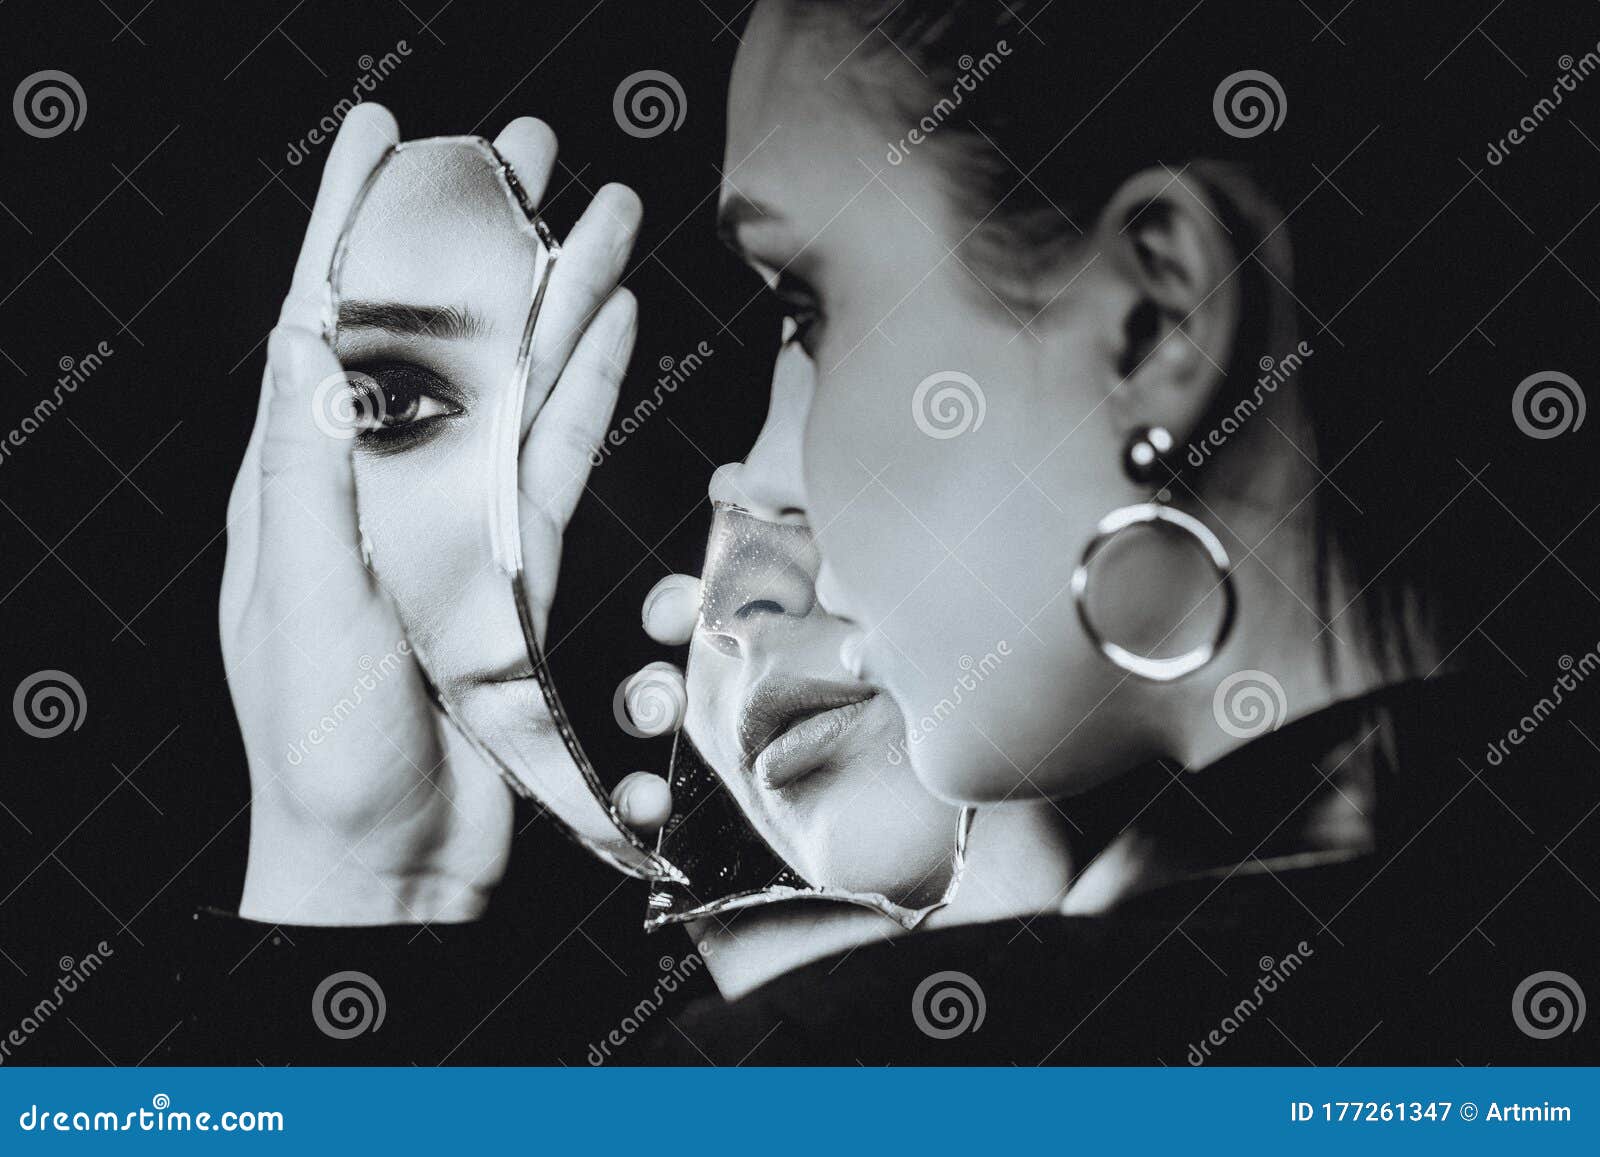 perfect woman looking at broken mirror on black background, black and white portrait